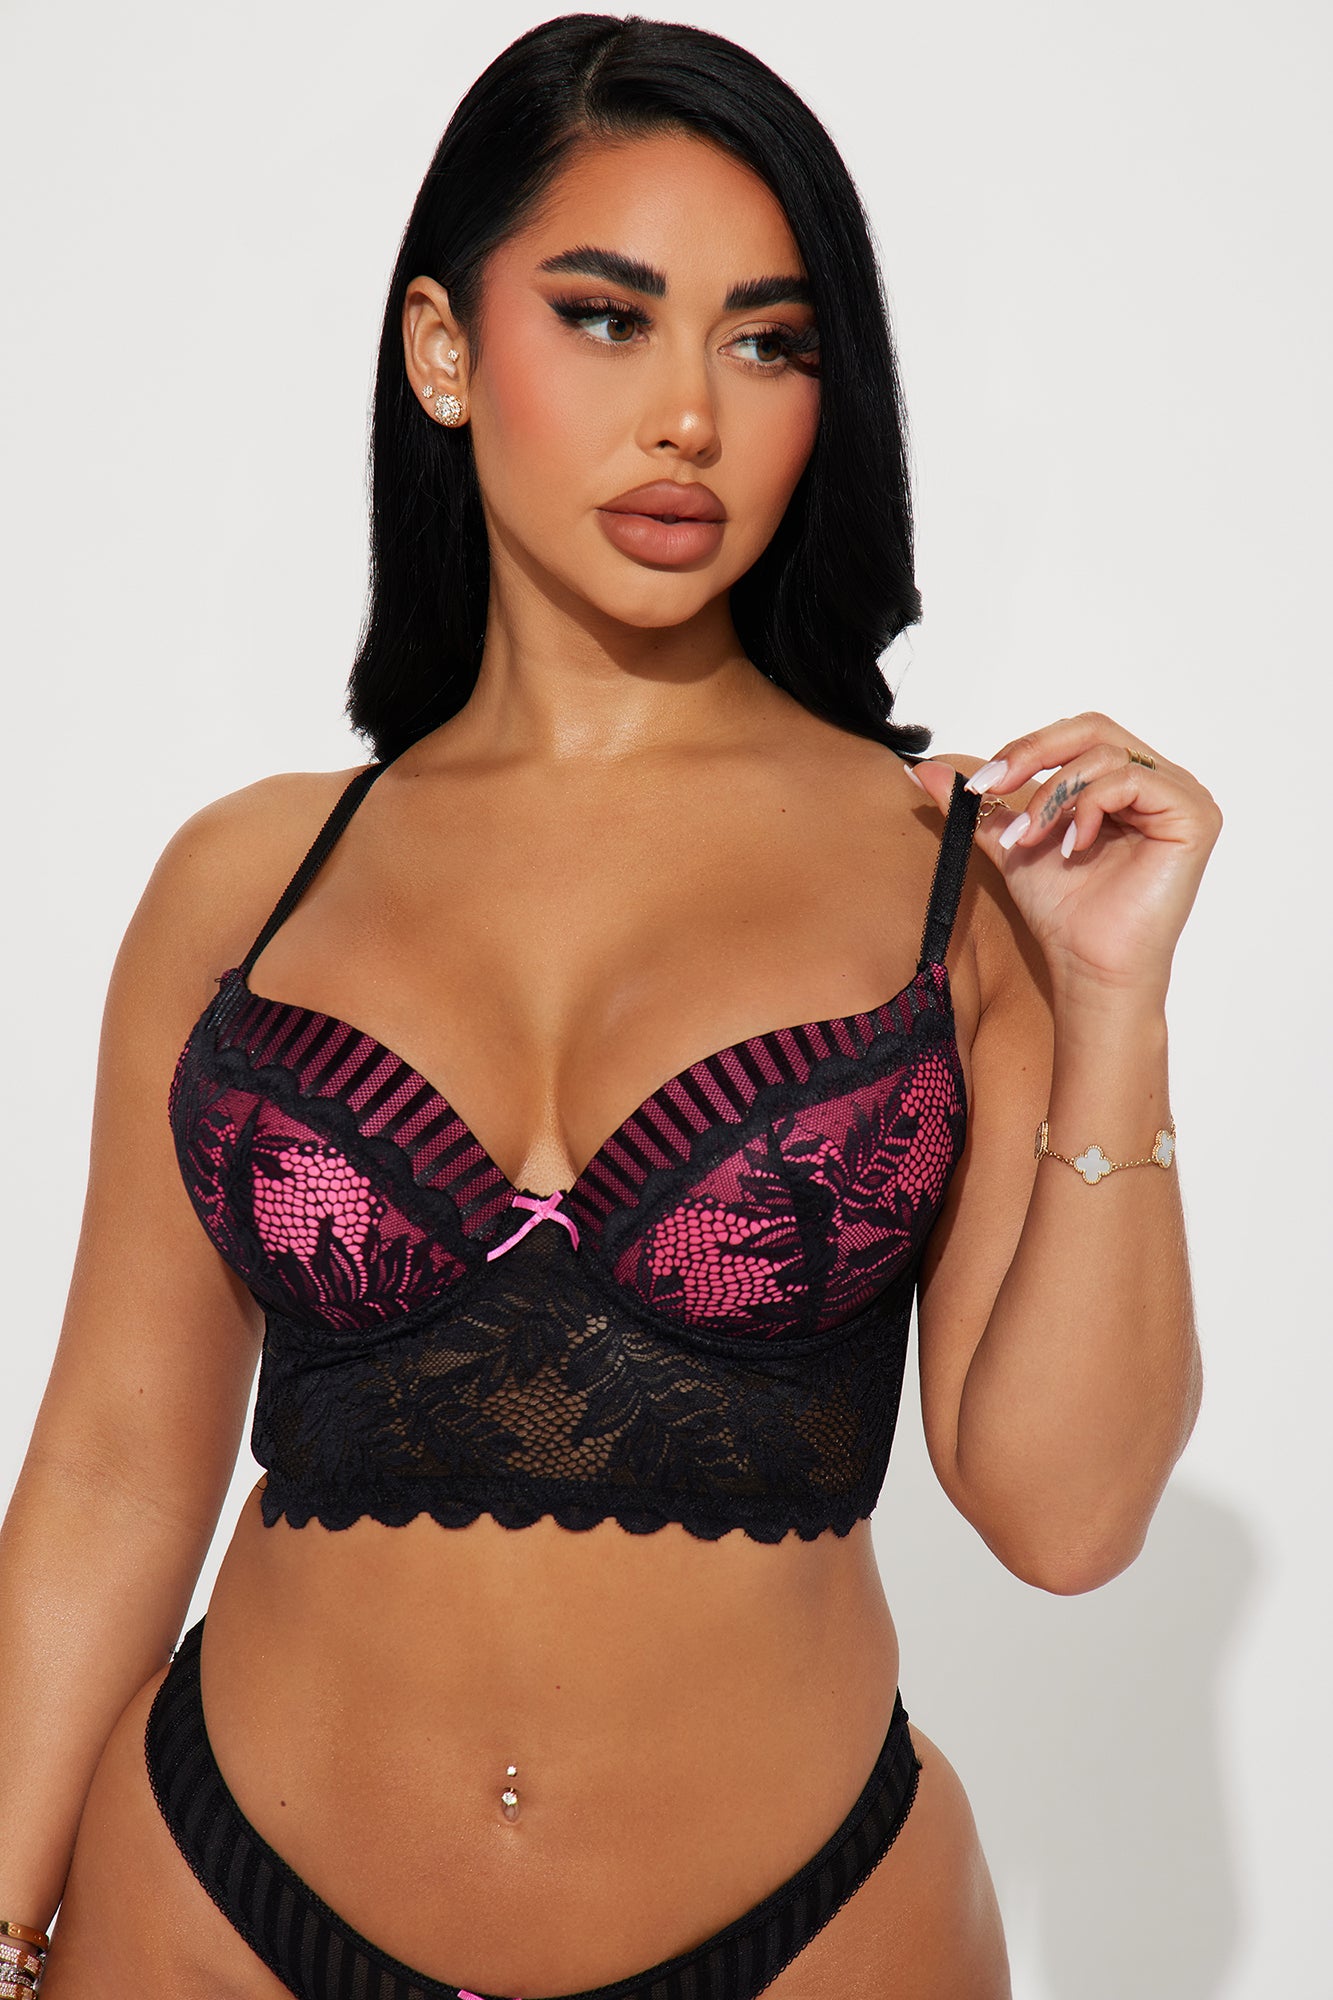 New Longline Bra With Charm 😍 ➡️ Currently available in sizes 36D, 36